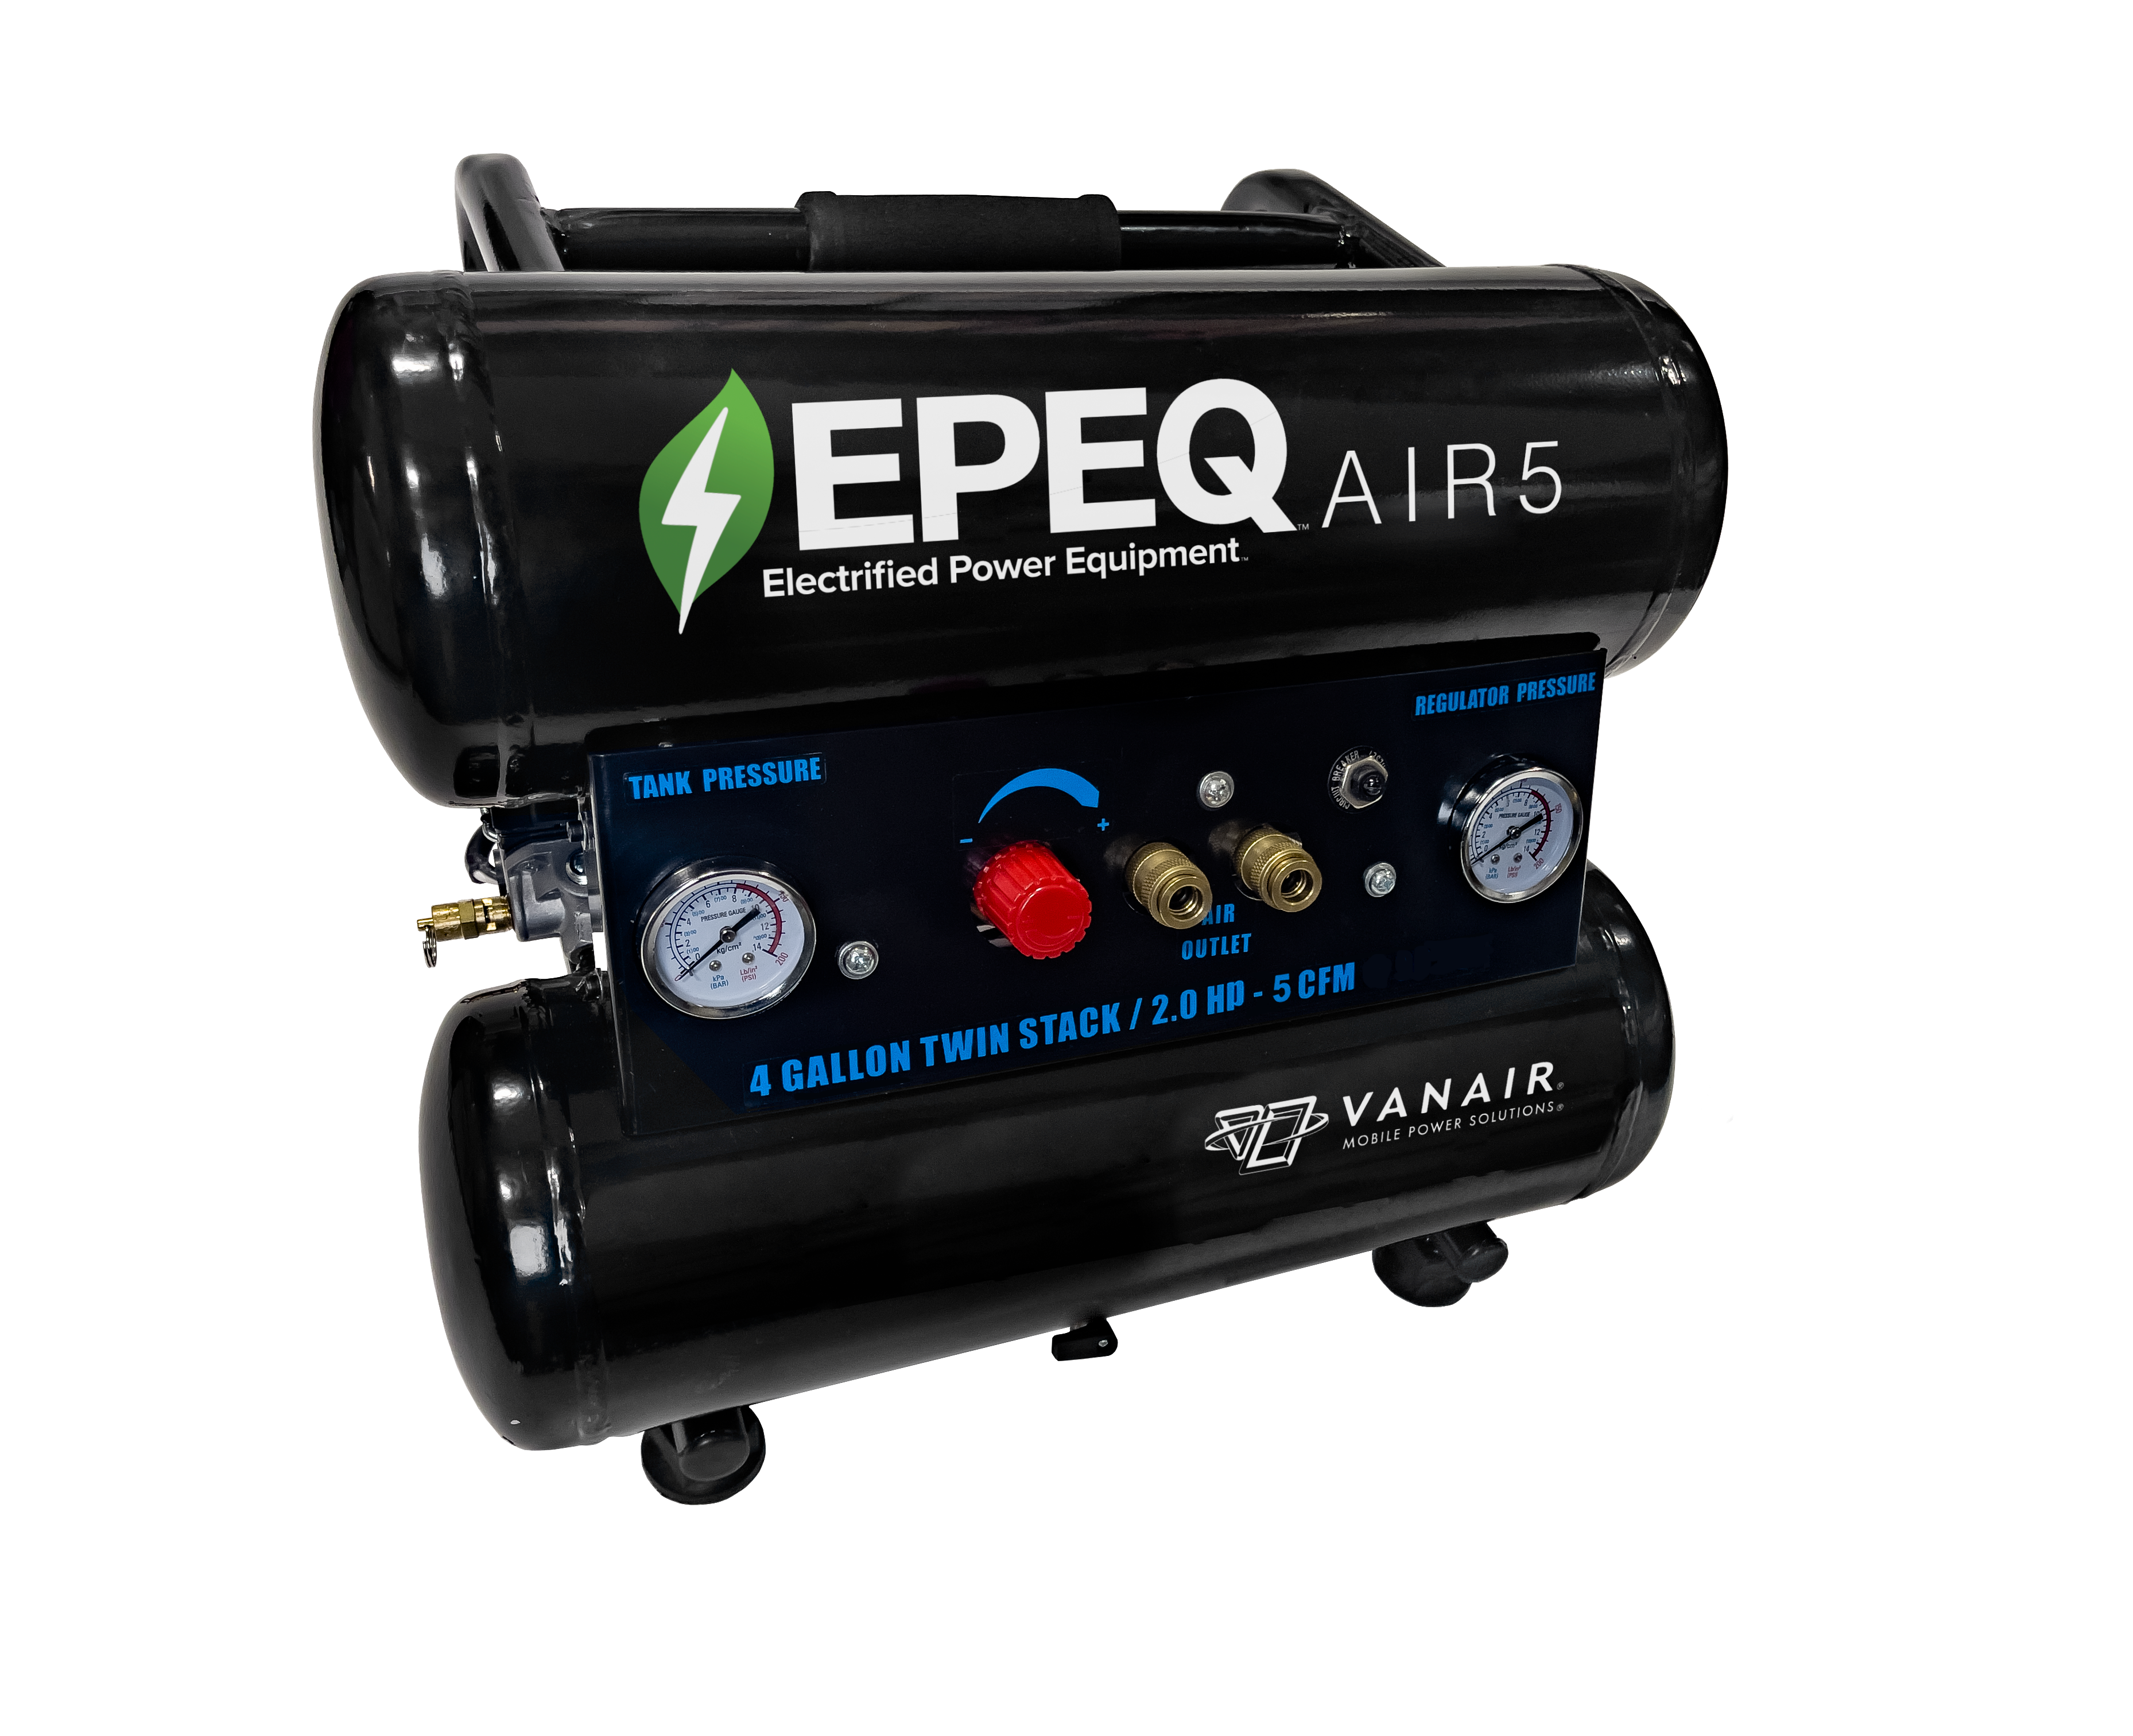 EPEQ® AIR5